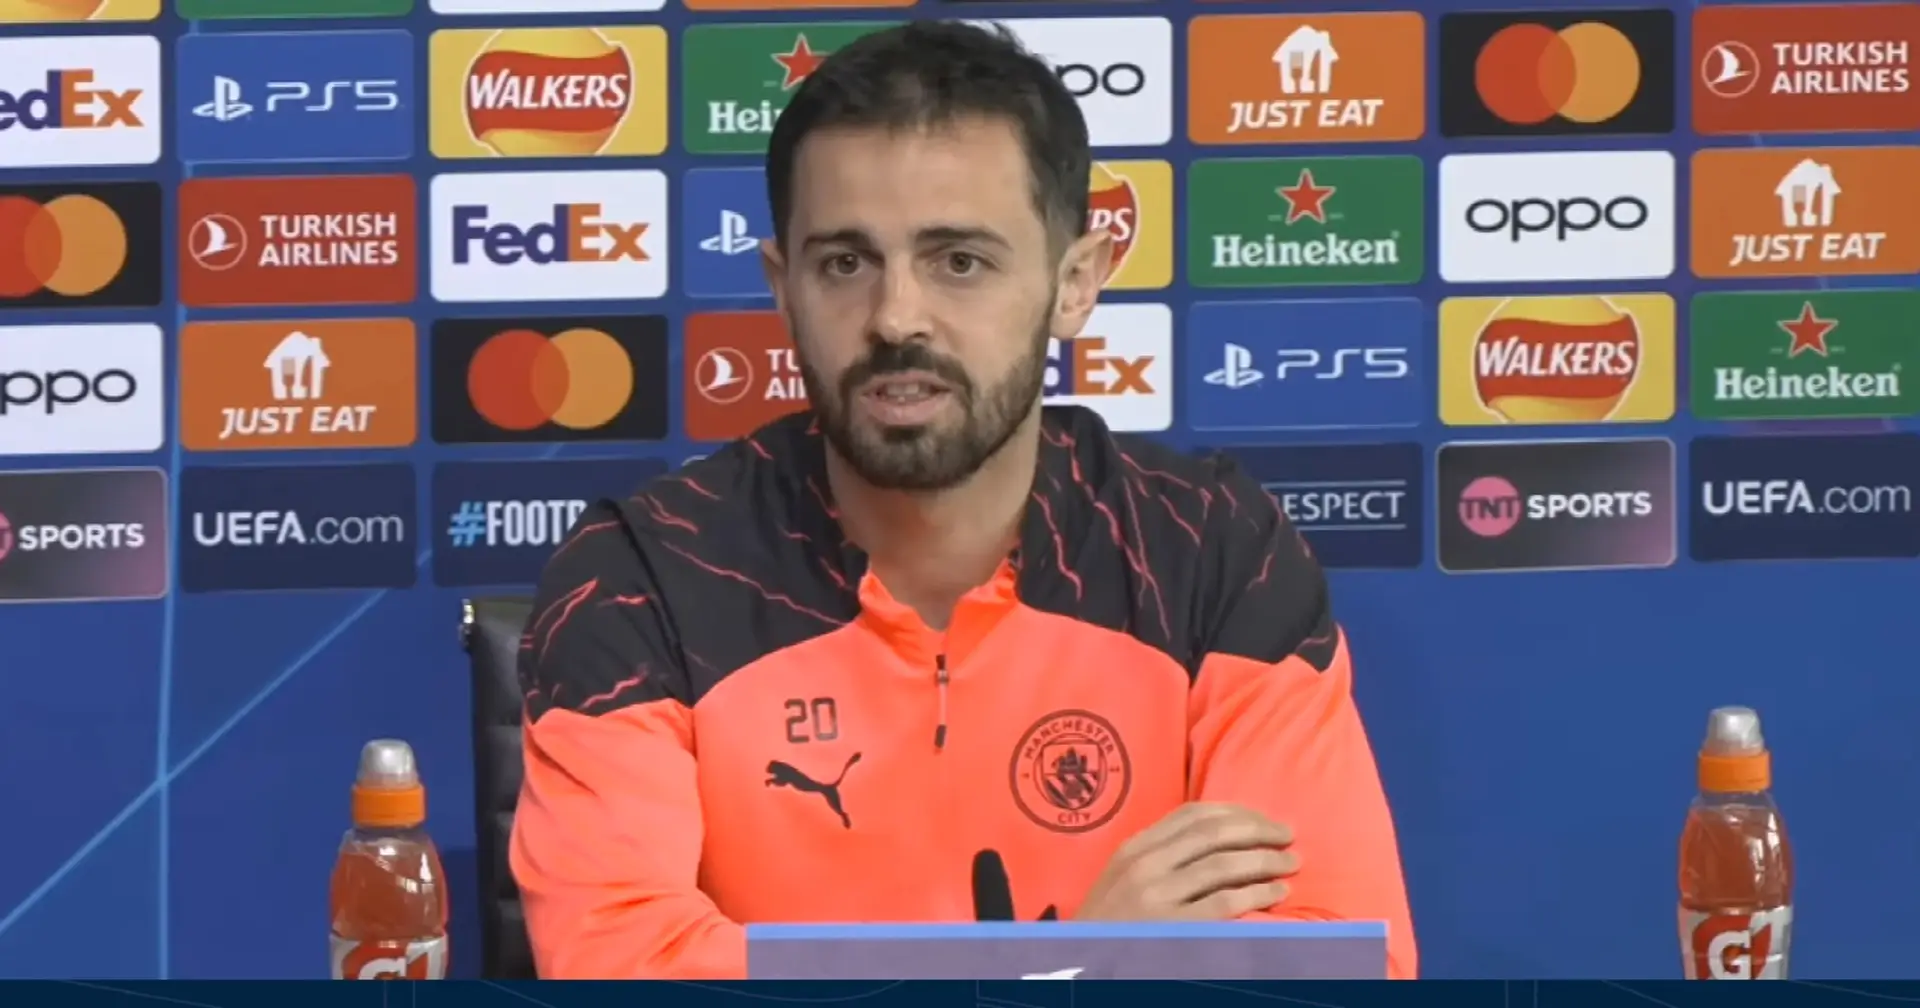 'Football is beautiful': Man City's Bernardo Silva reacts to Liverpool and Arsenal dropping points on the same day